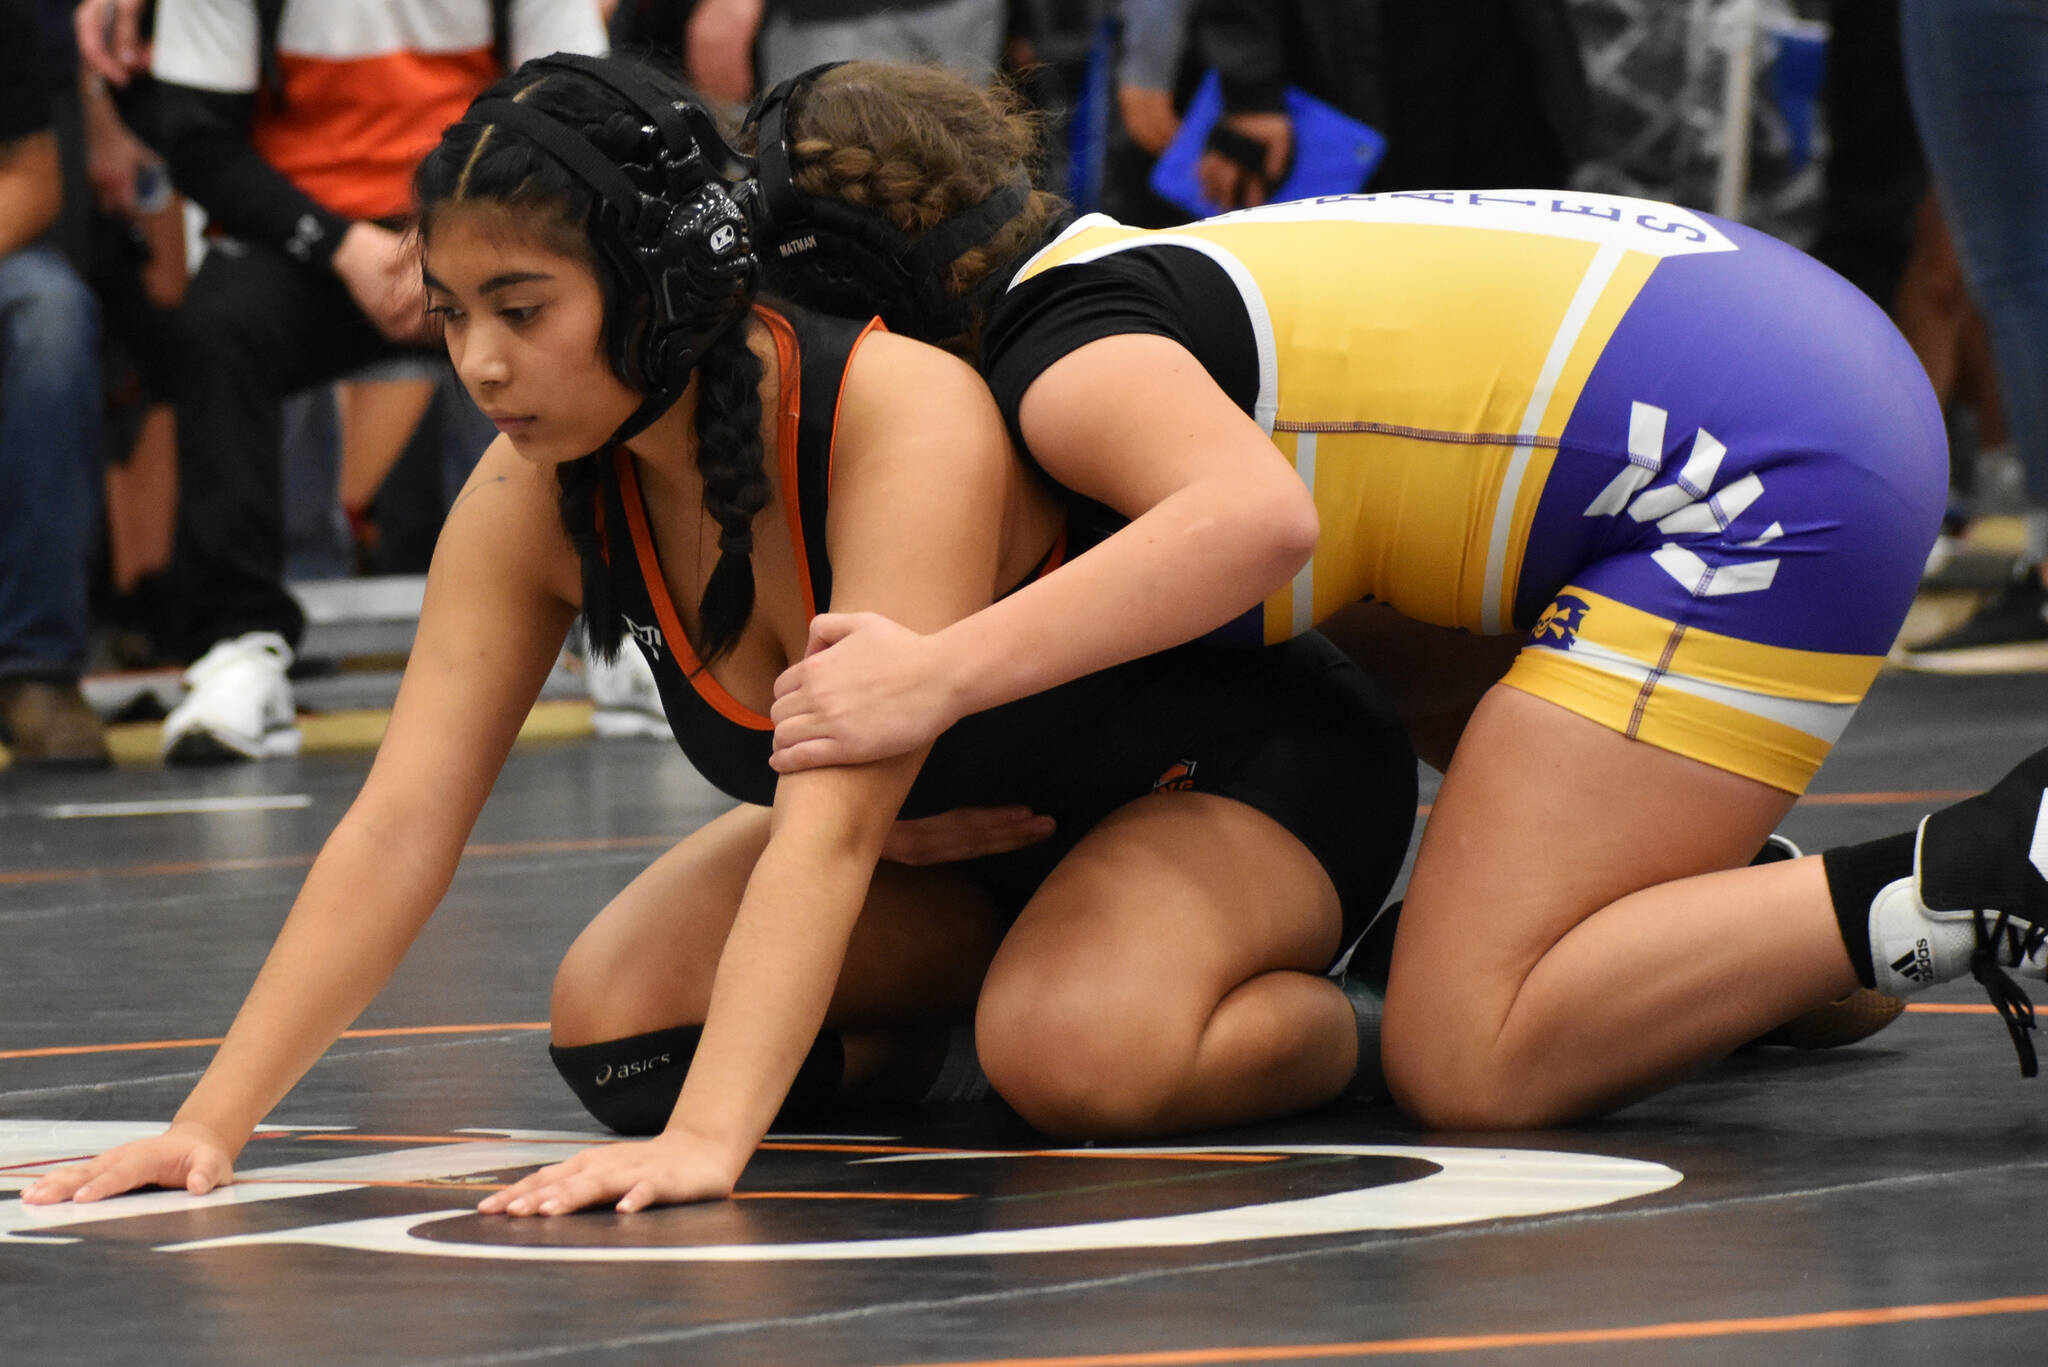 Central Kitsap sent the largest girls wrestling team out of any school in the county.